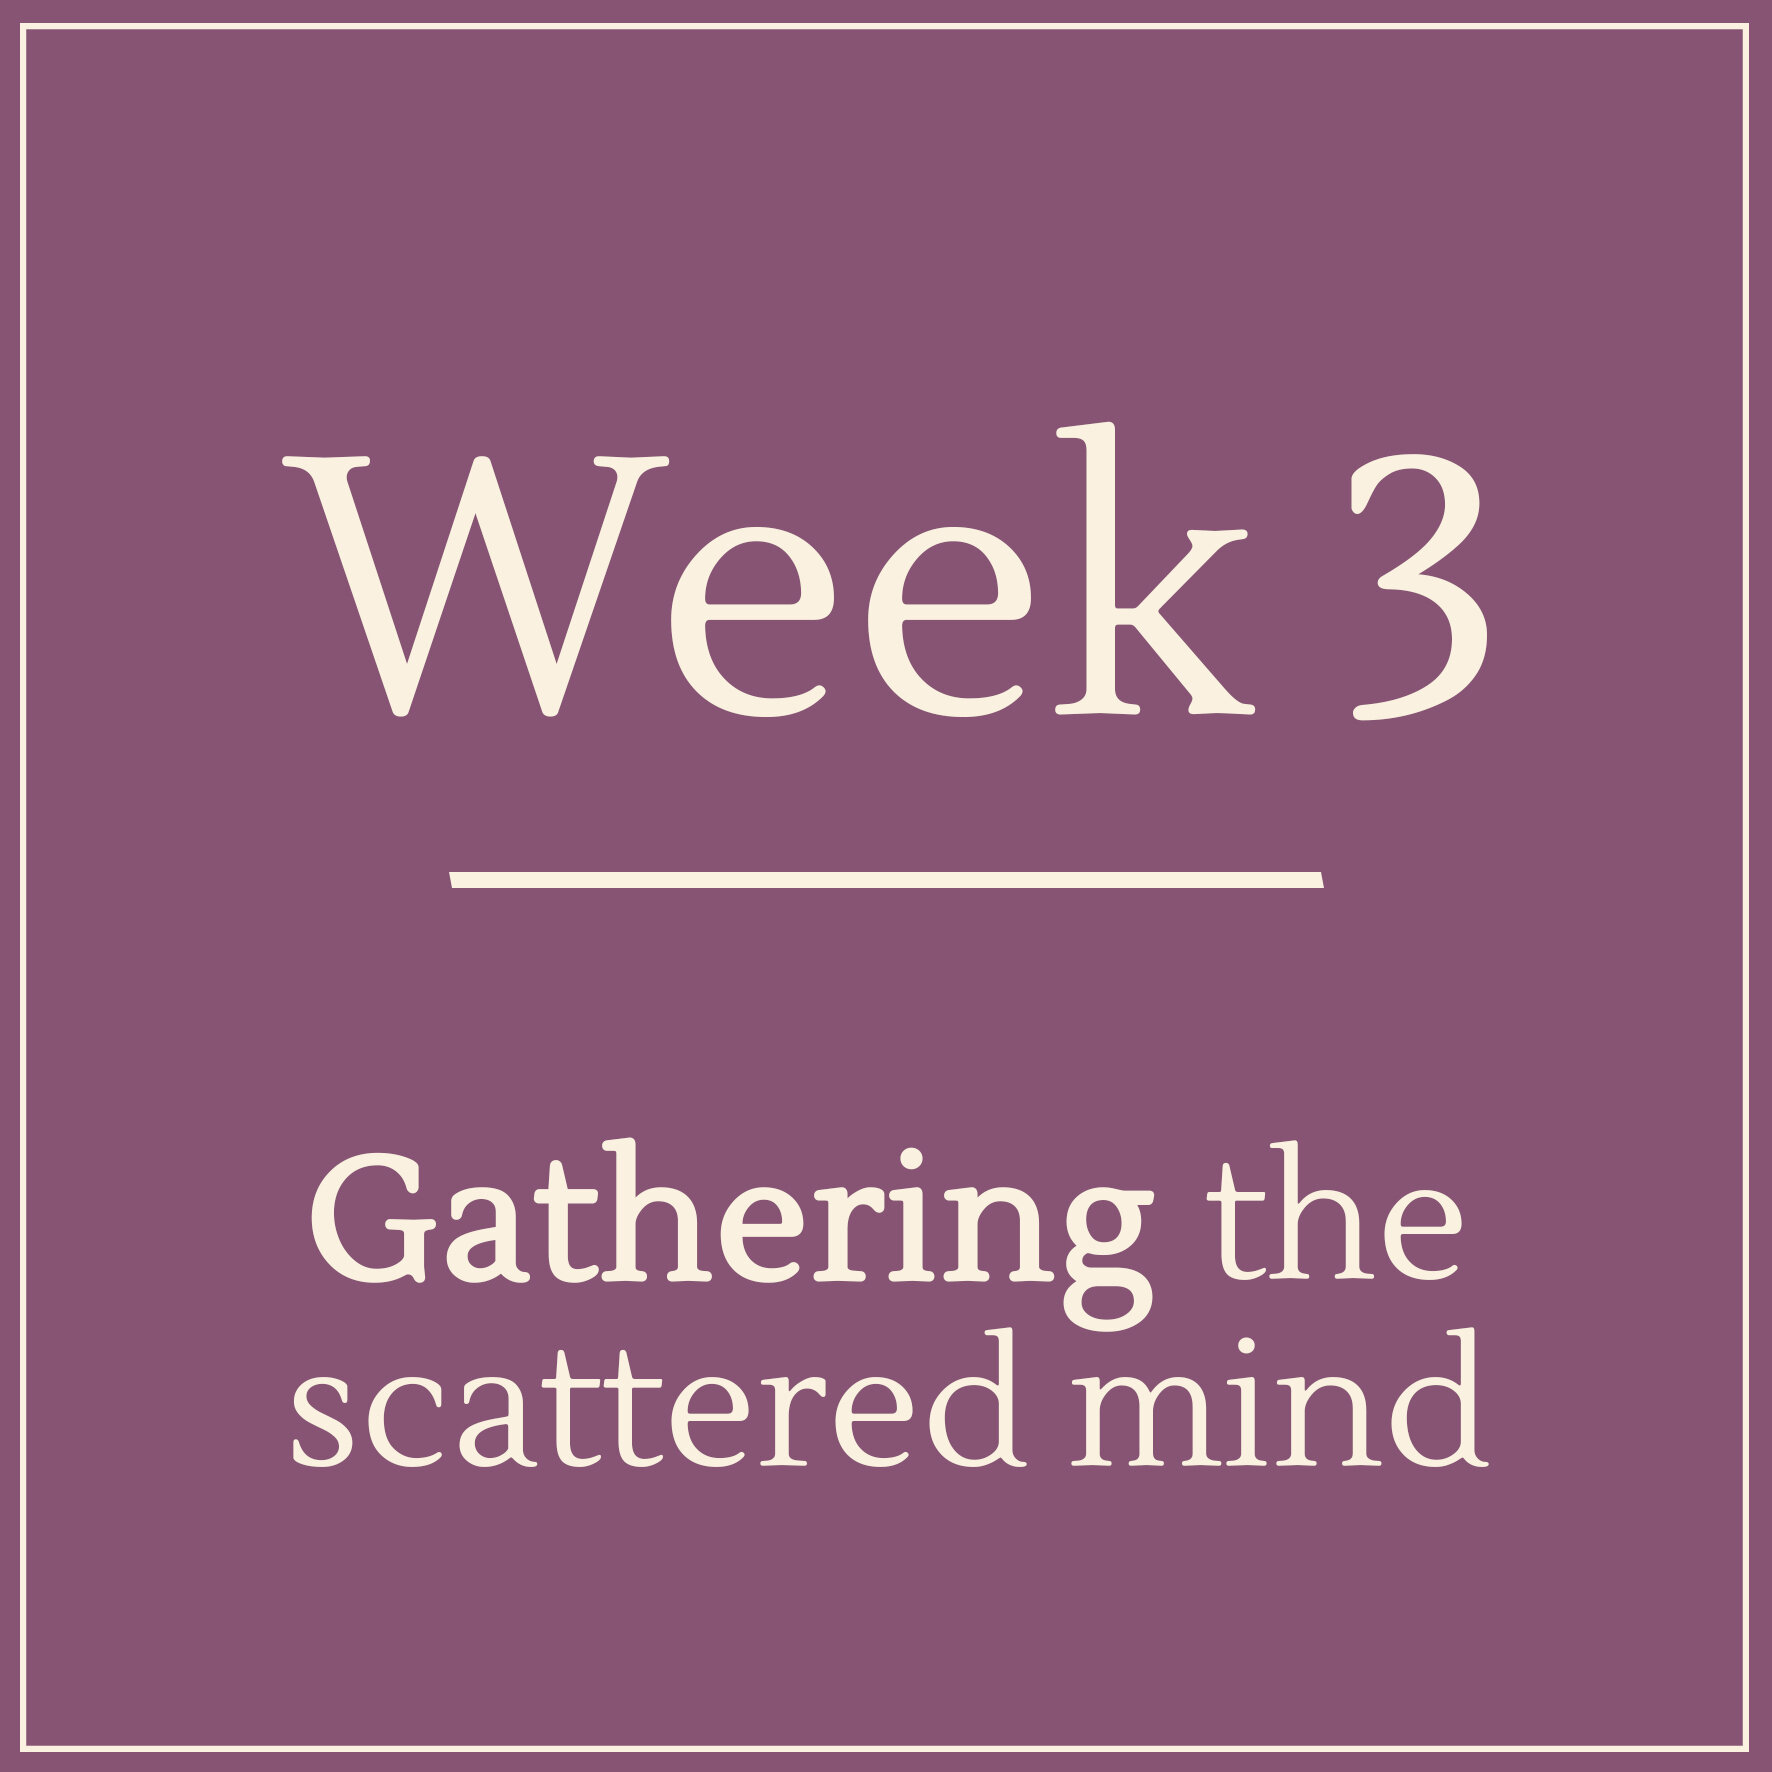 Week 3 - Gathering the scattered mind - Learn Mindfulness